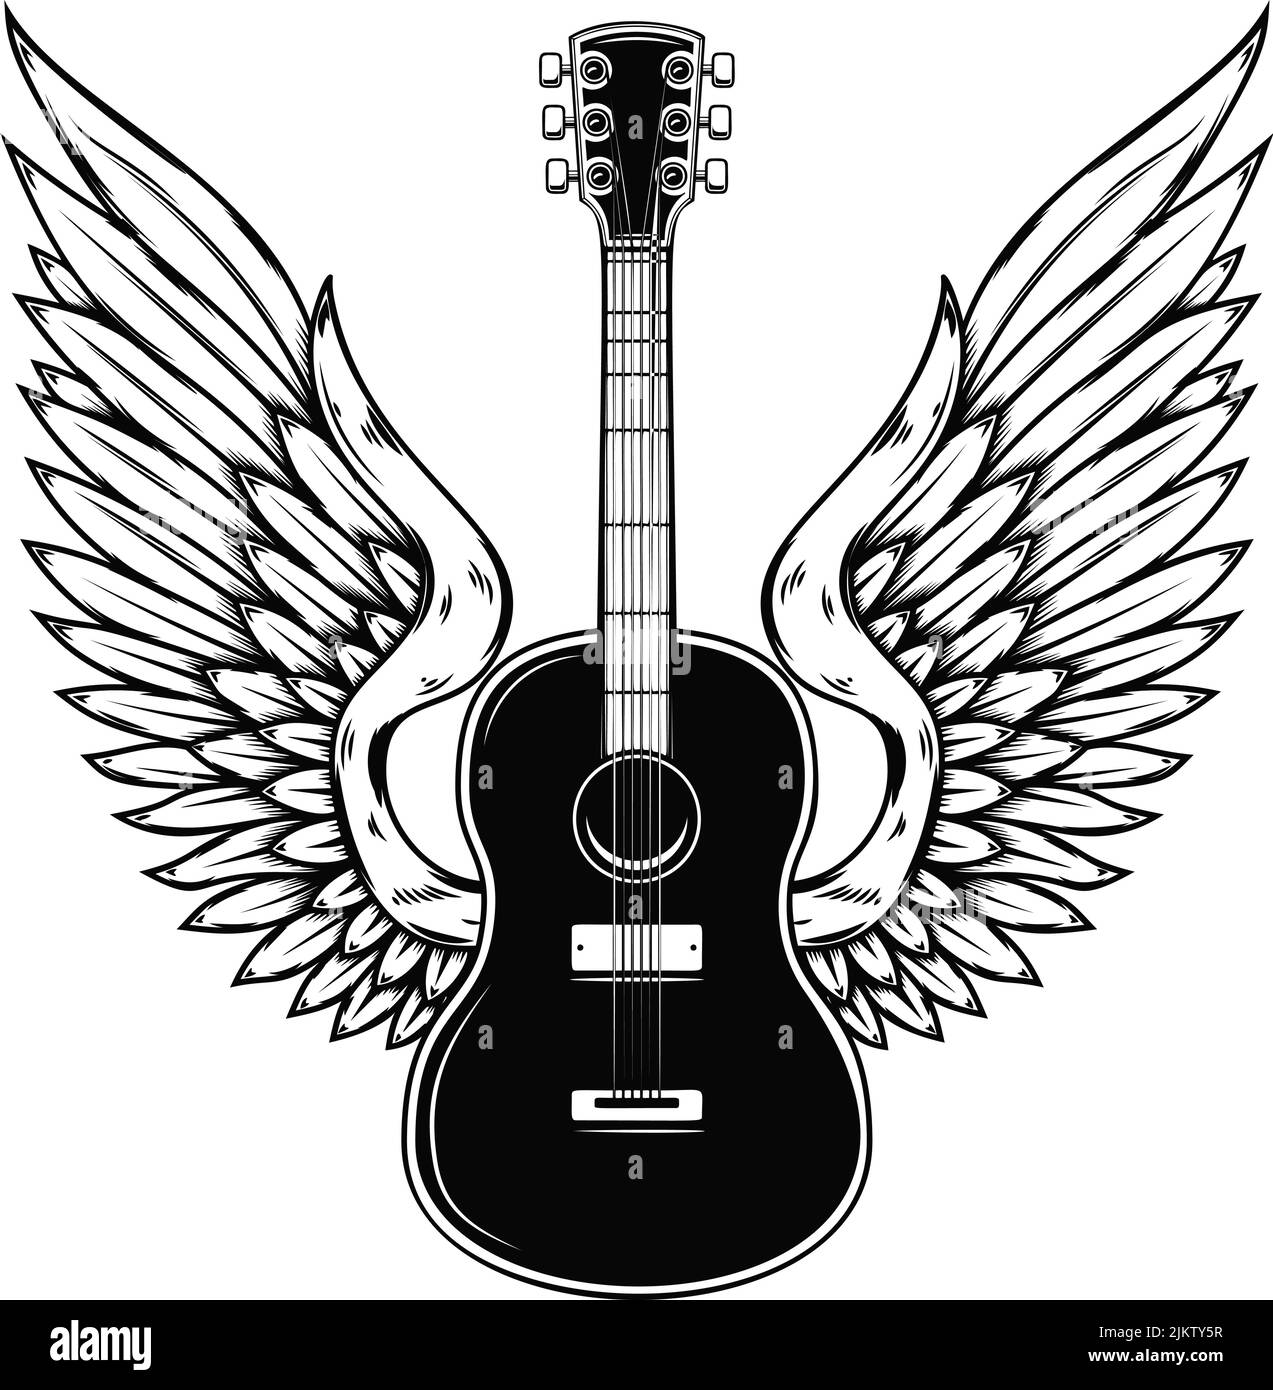 Black Ornate Acoustics Guitar Tattoo Style Stock Vector (Royalty Free)  328153244 | Shutterstock